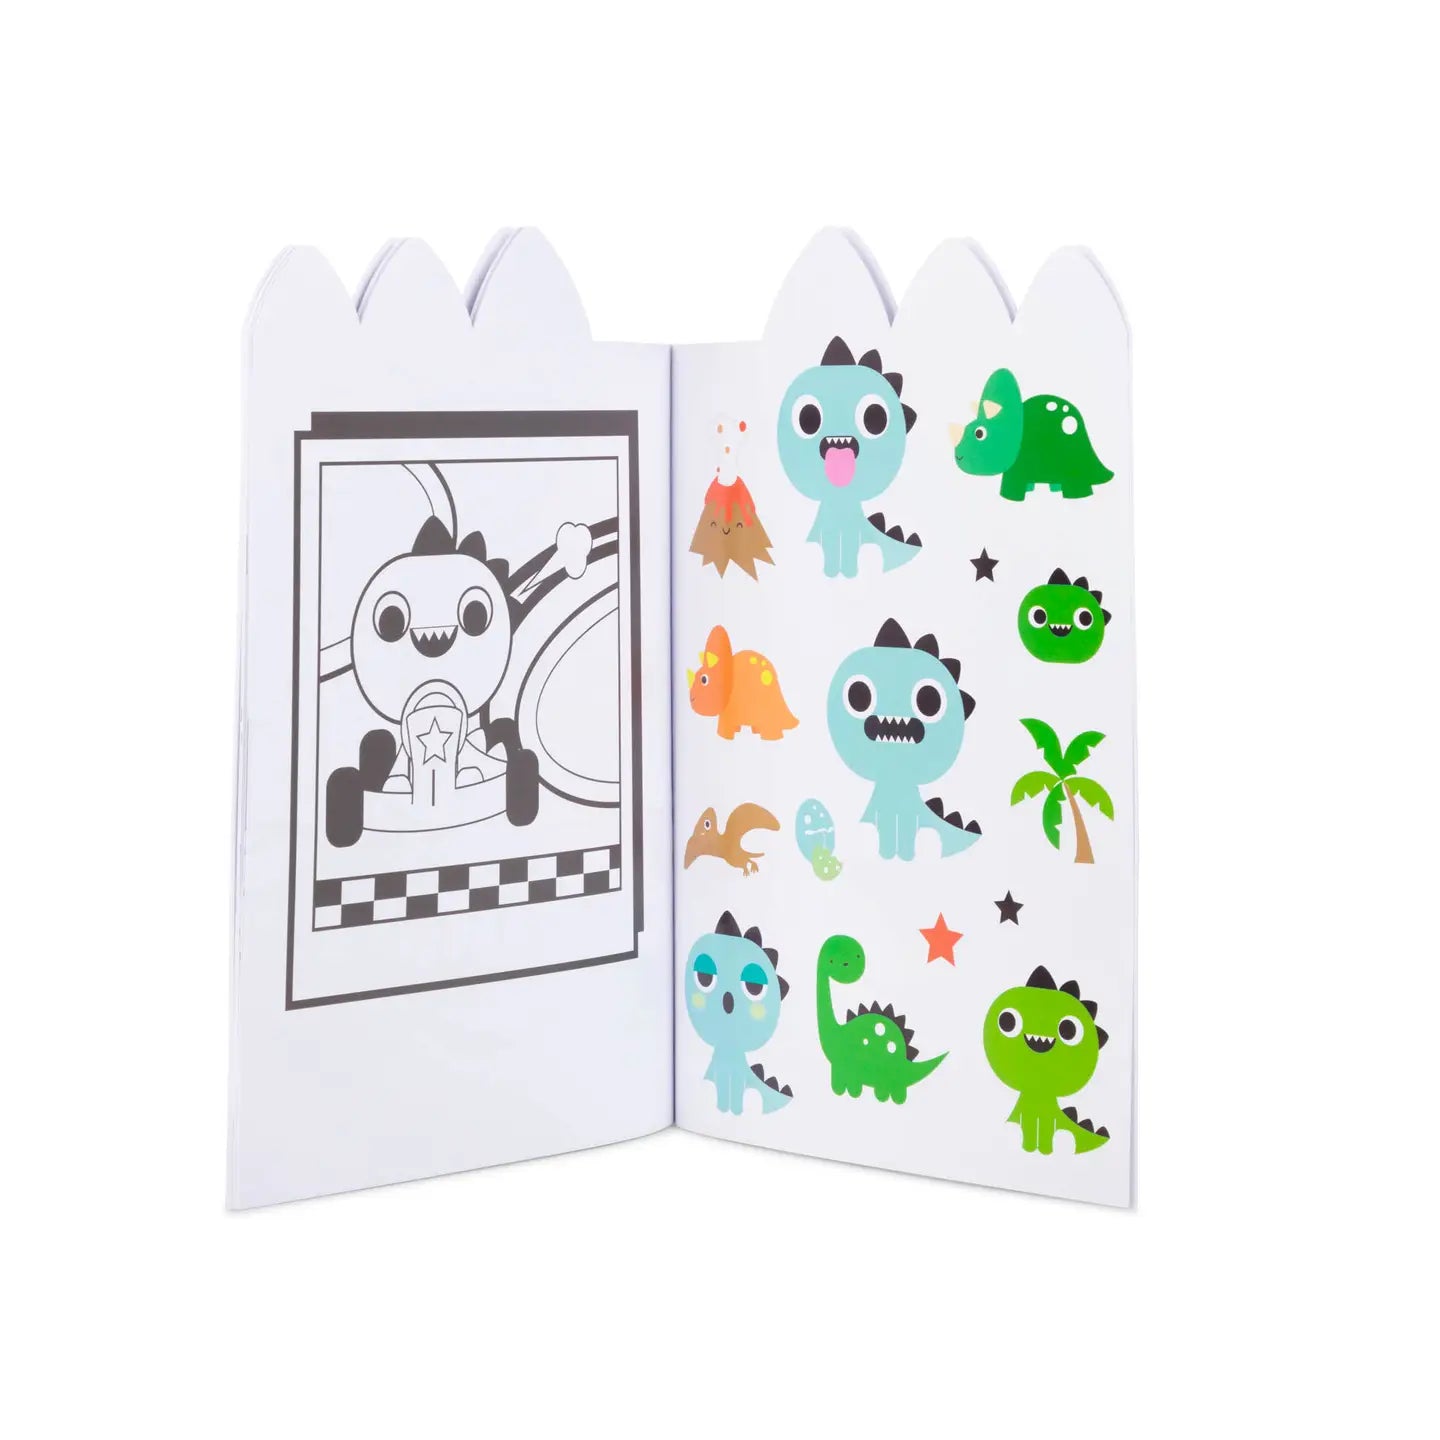 Dinosaur stationery/card collection